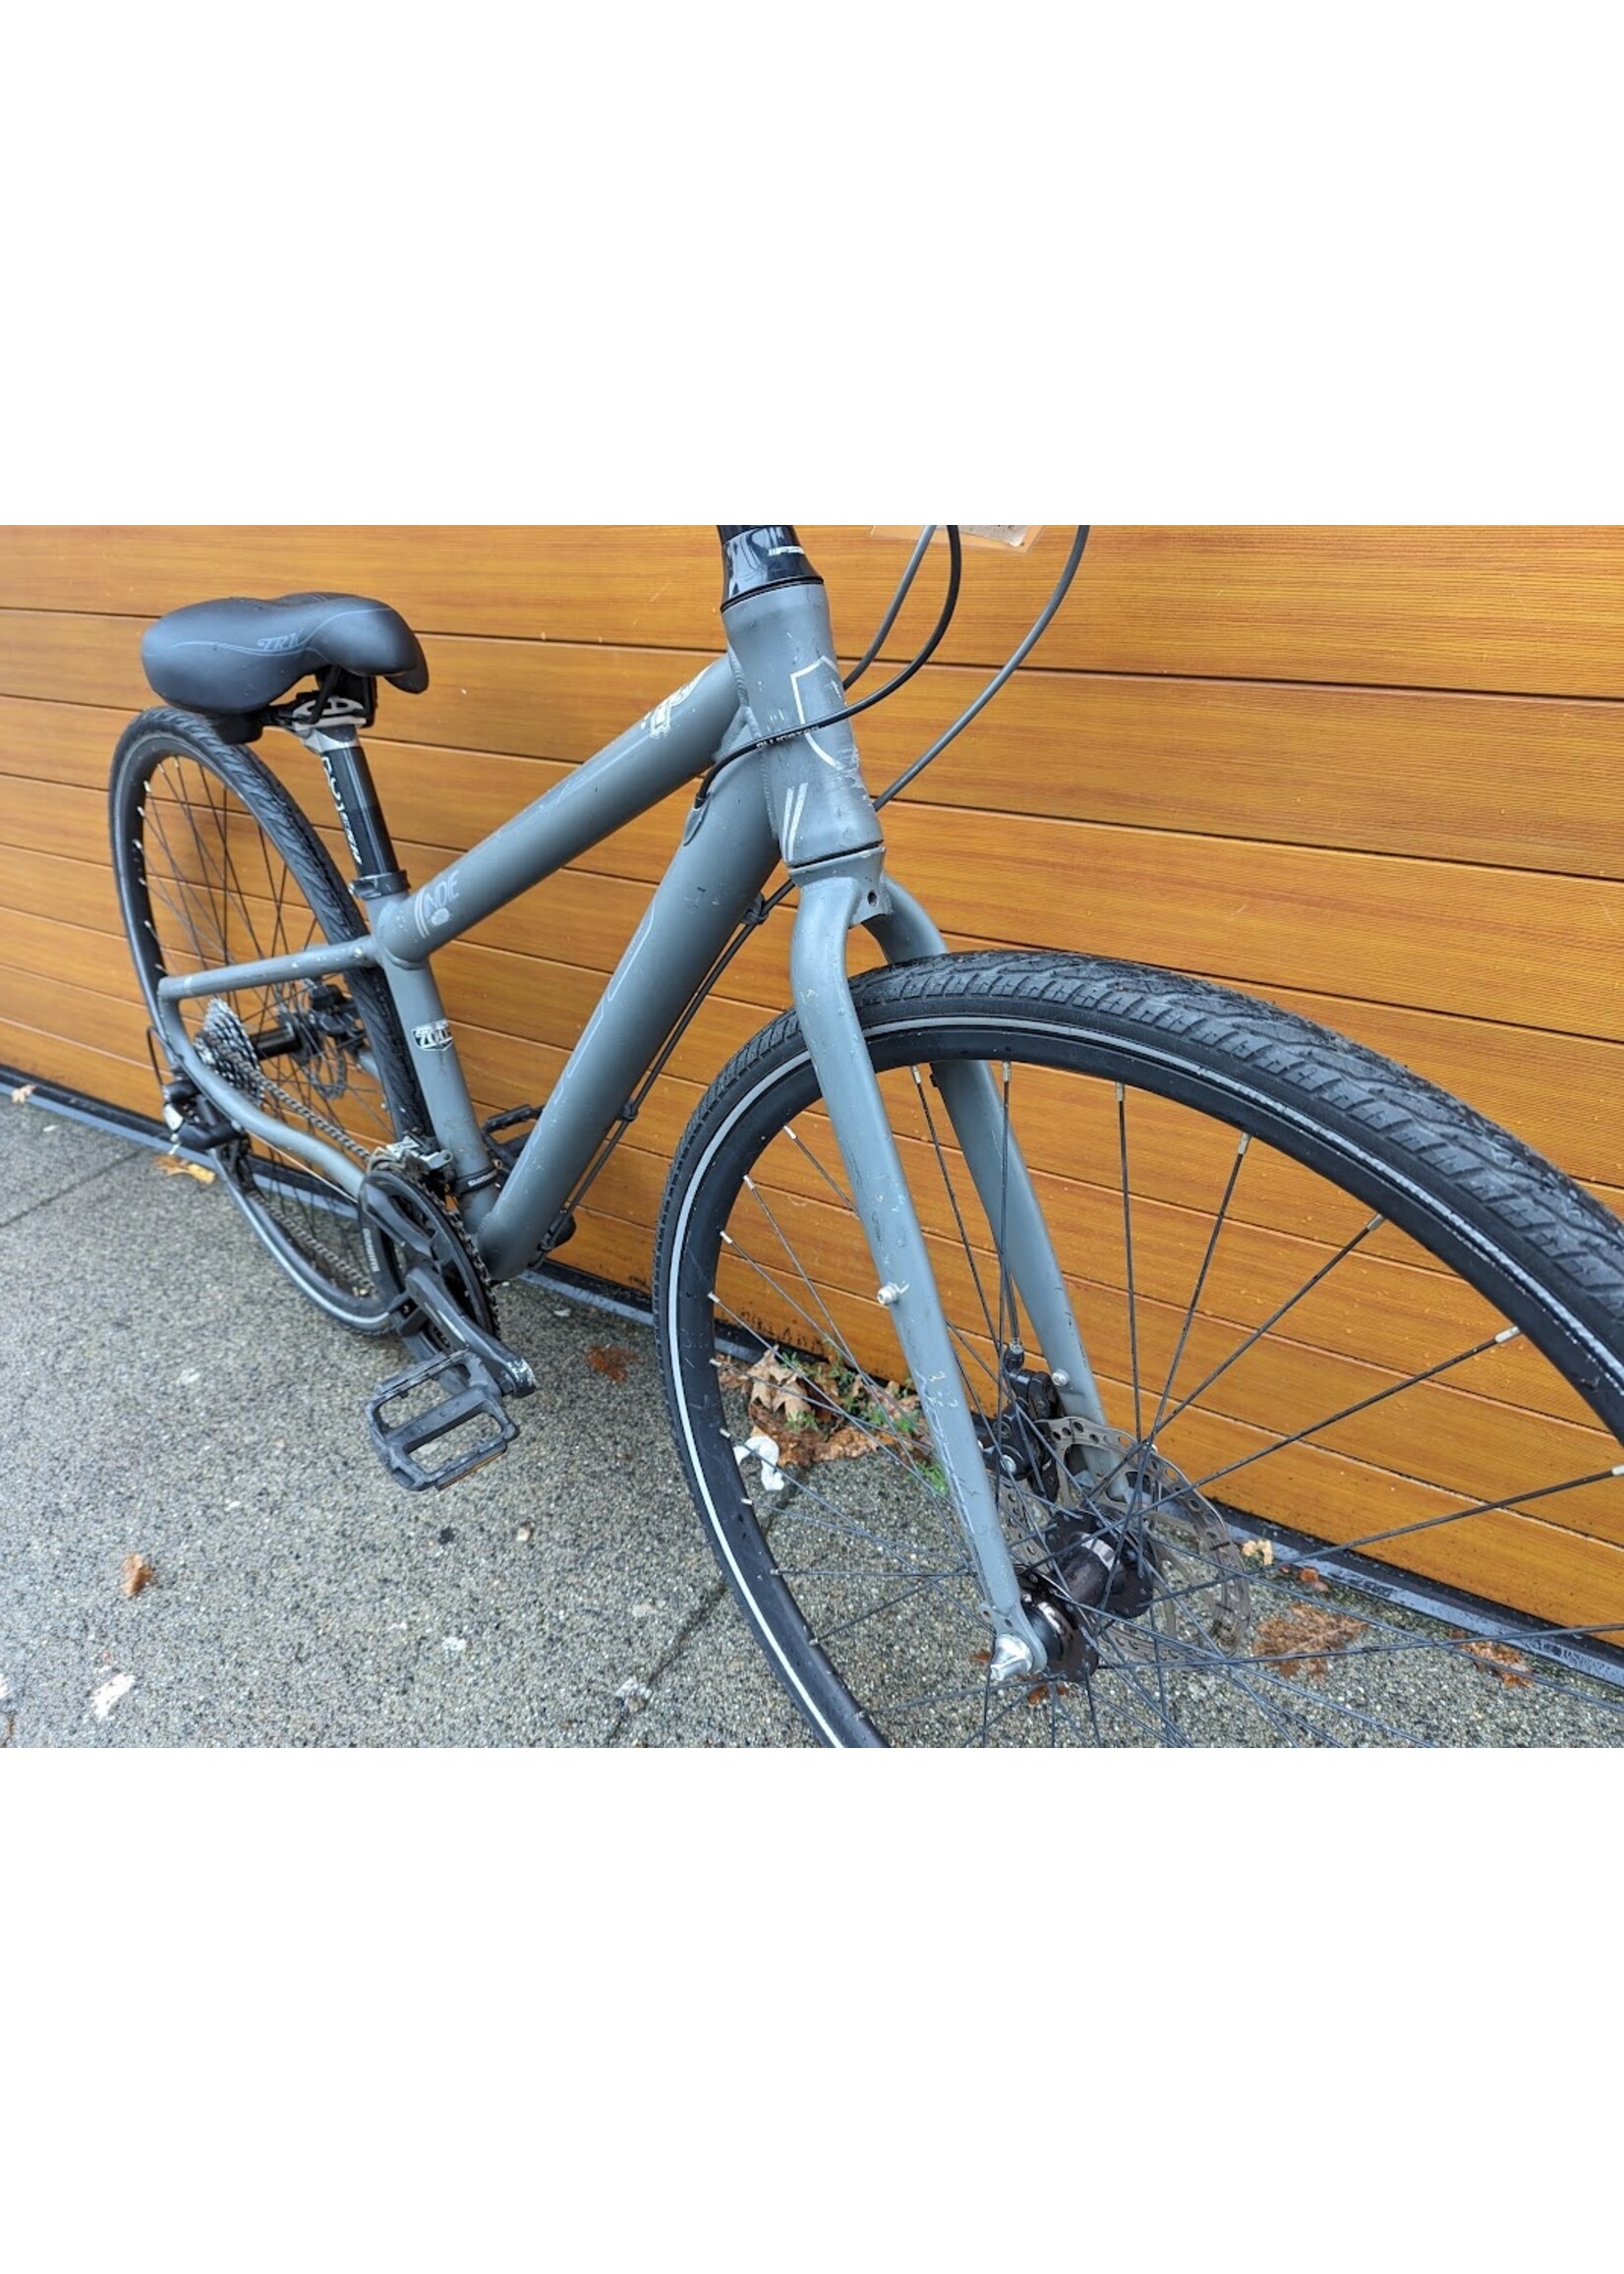 USED NORCO Indie, 13 Inch, XS grey